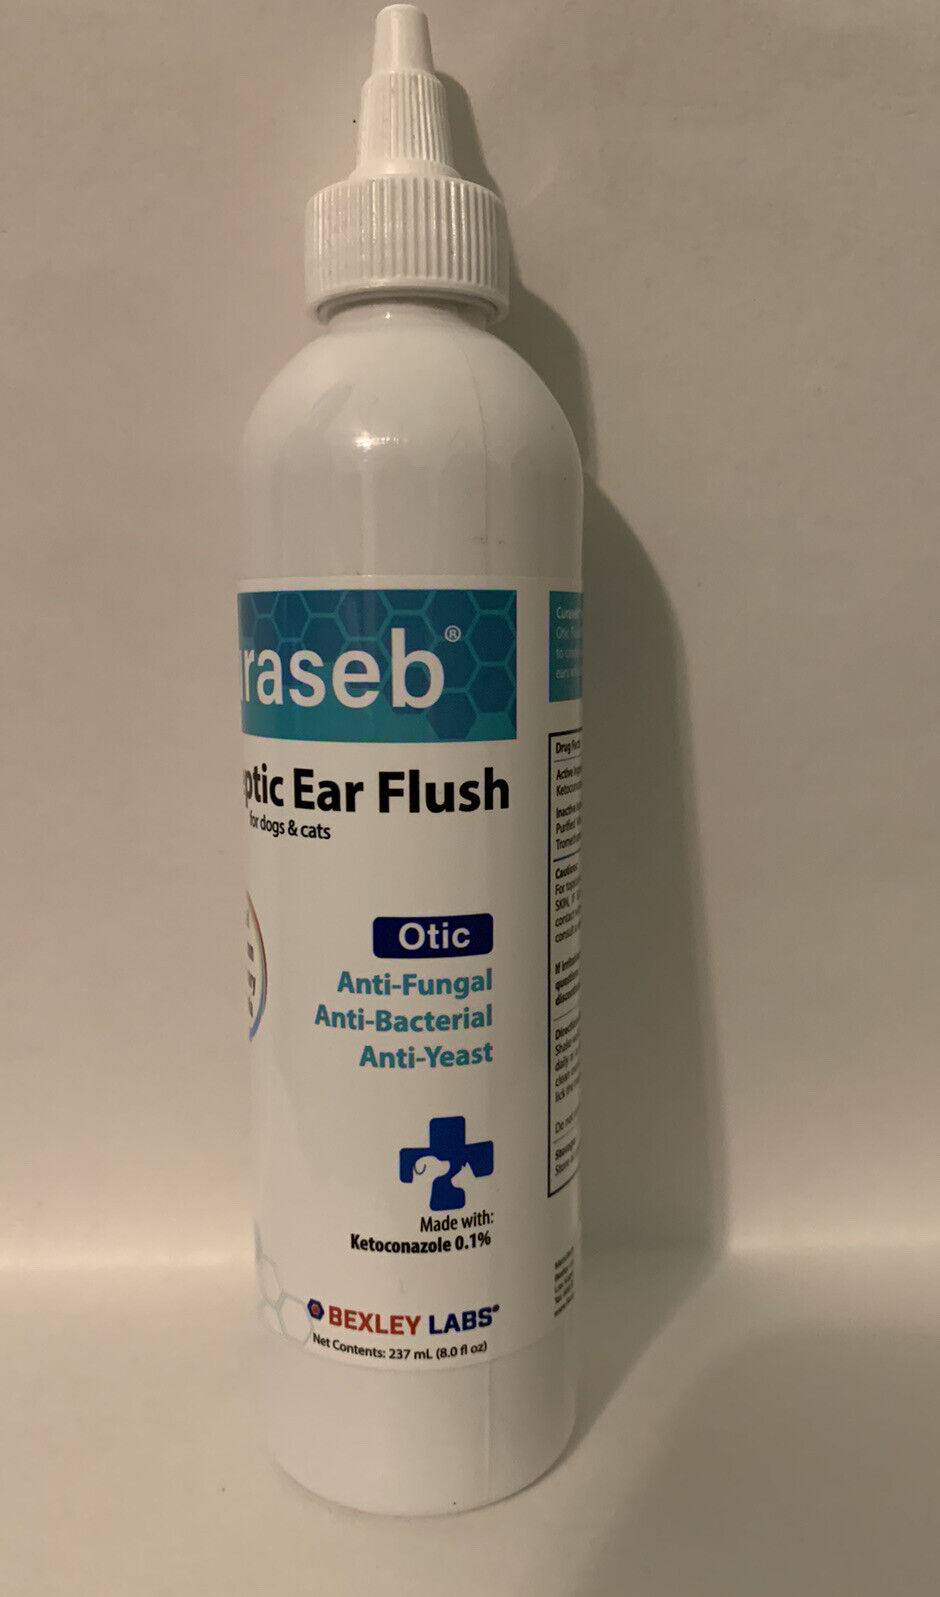 Curaseb Antiseptic Ear Flush For Dogs and Cats 08 oz